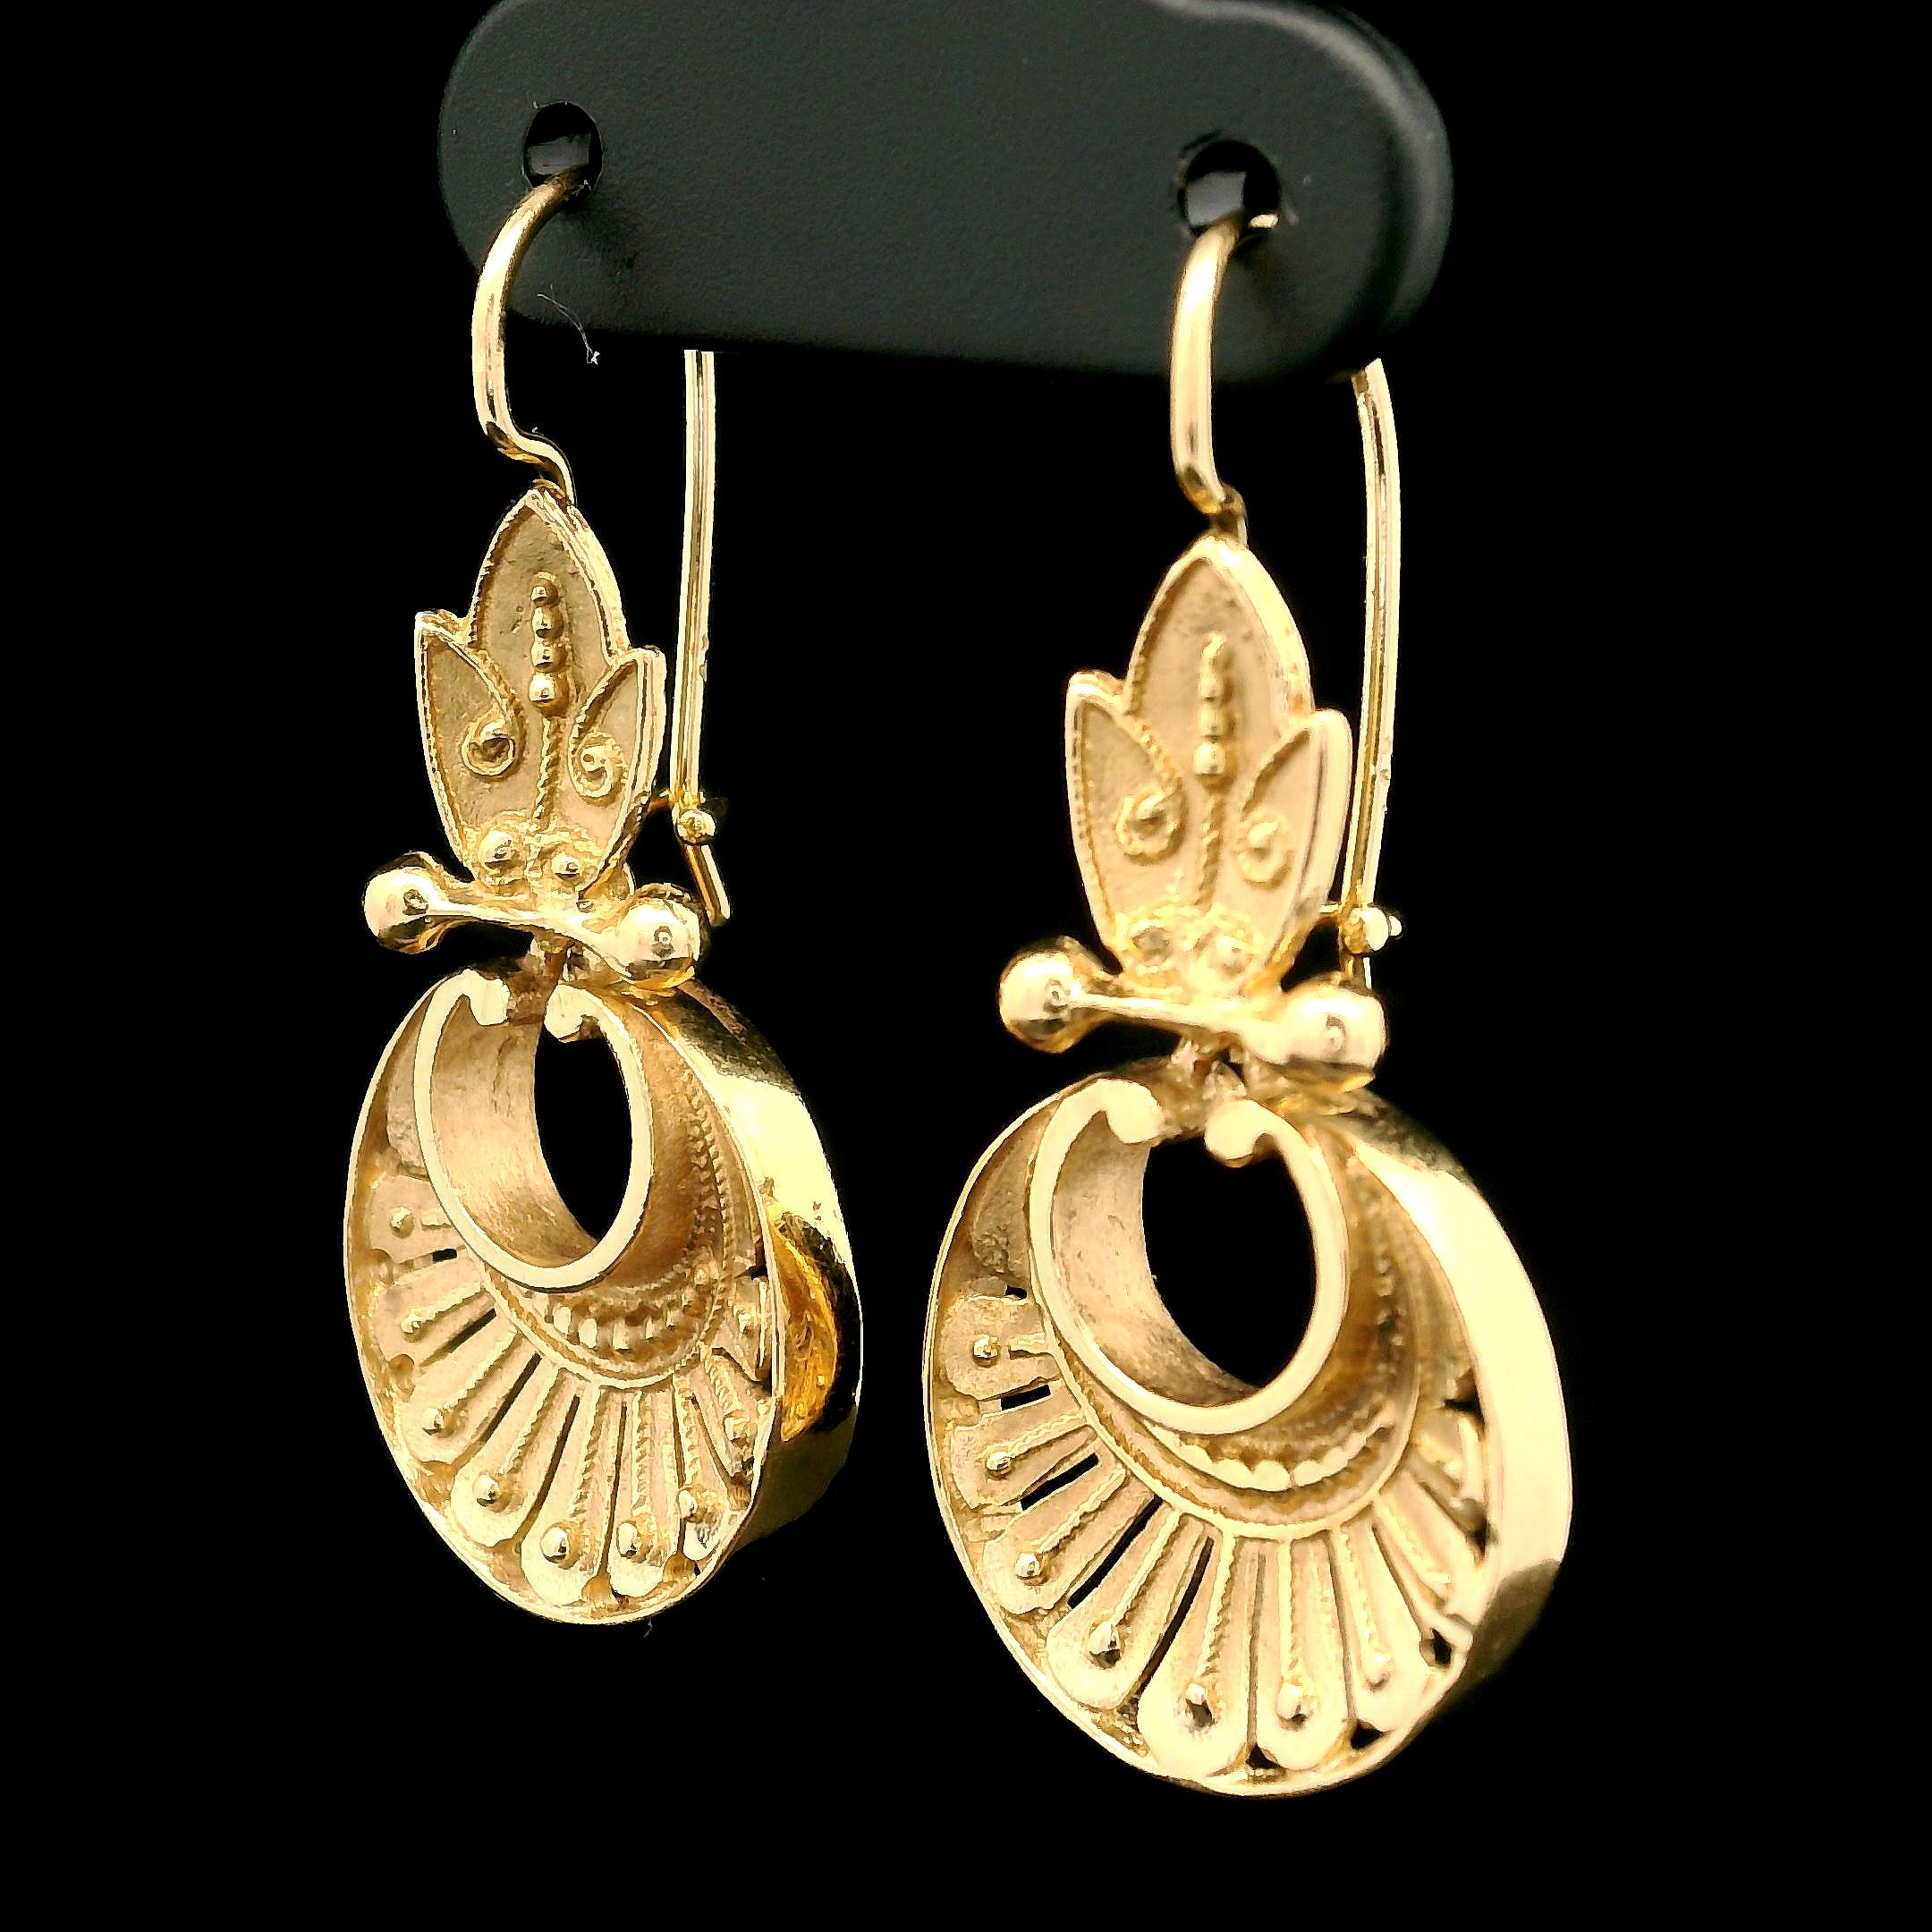 Vintage Etruscan Revival 14k Yellow Gold Ornate Dangle Drop Earrings For Sale 4